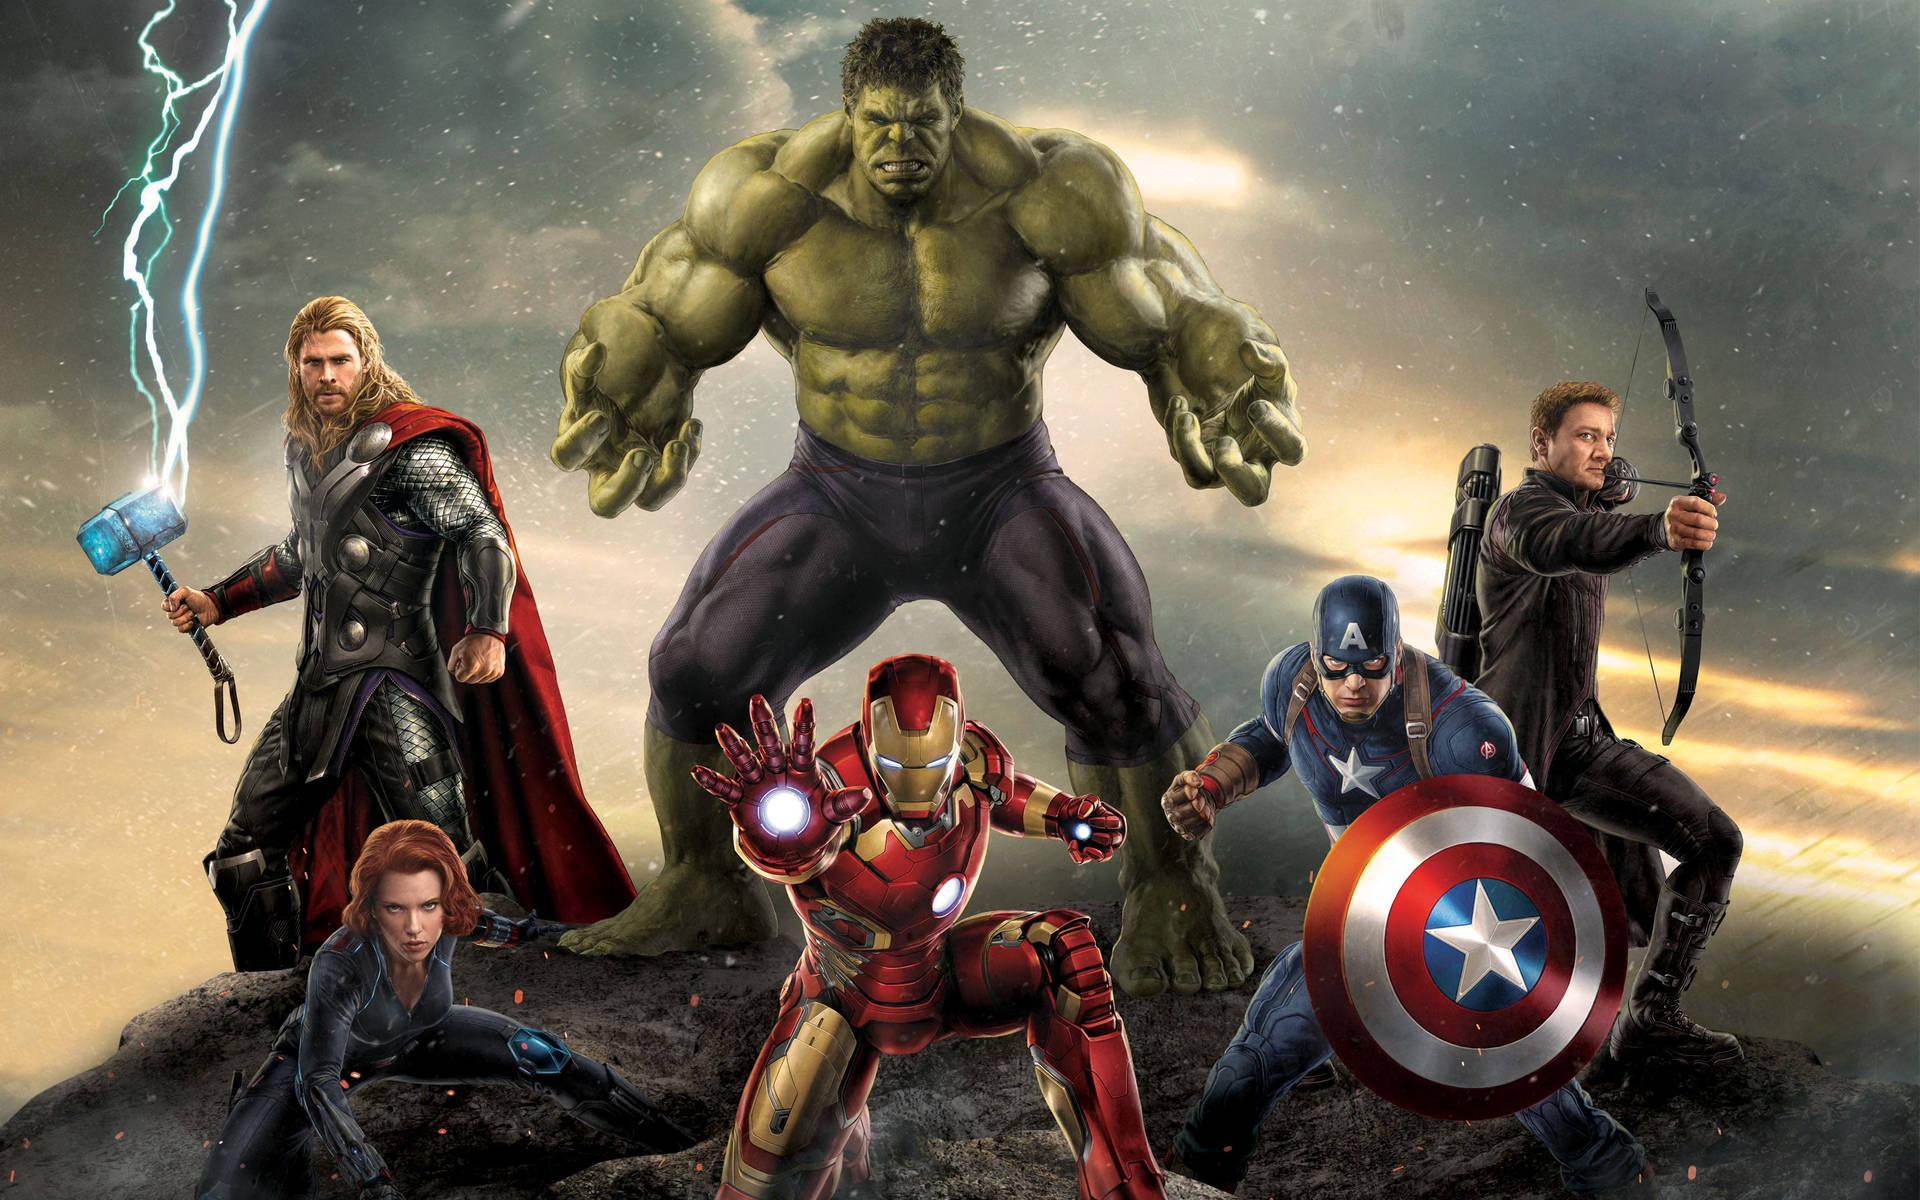 Avengers Superhero characters on battlefield with Hulk, Iron Man, Thor and Captain America.